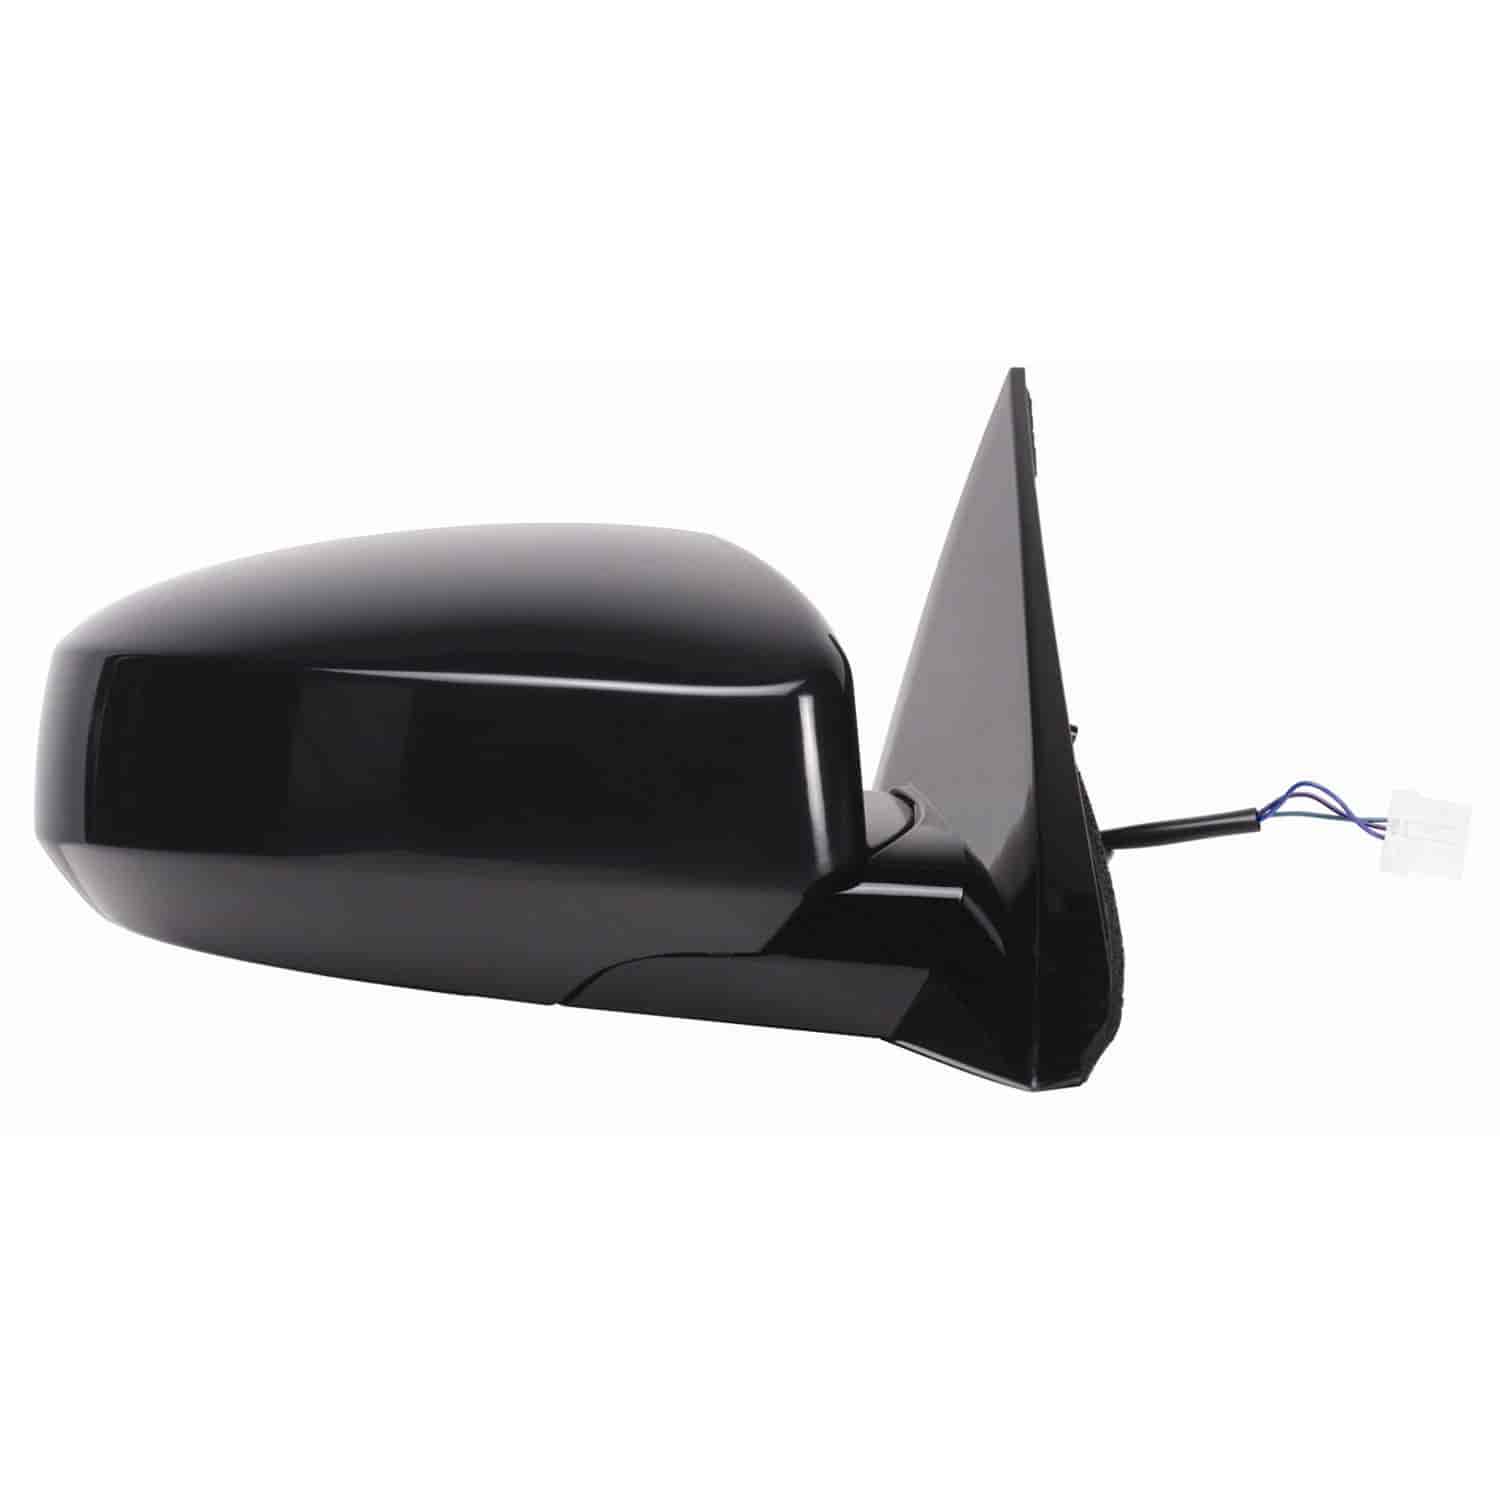 OEM Style Replacement mirror for 04-08 Nissan Maxima passenger side mirror tested to fit and functio